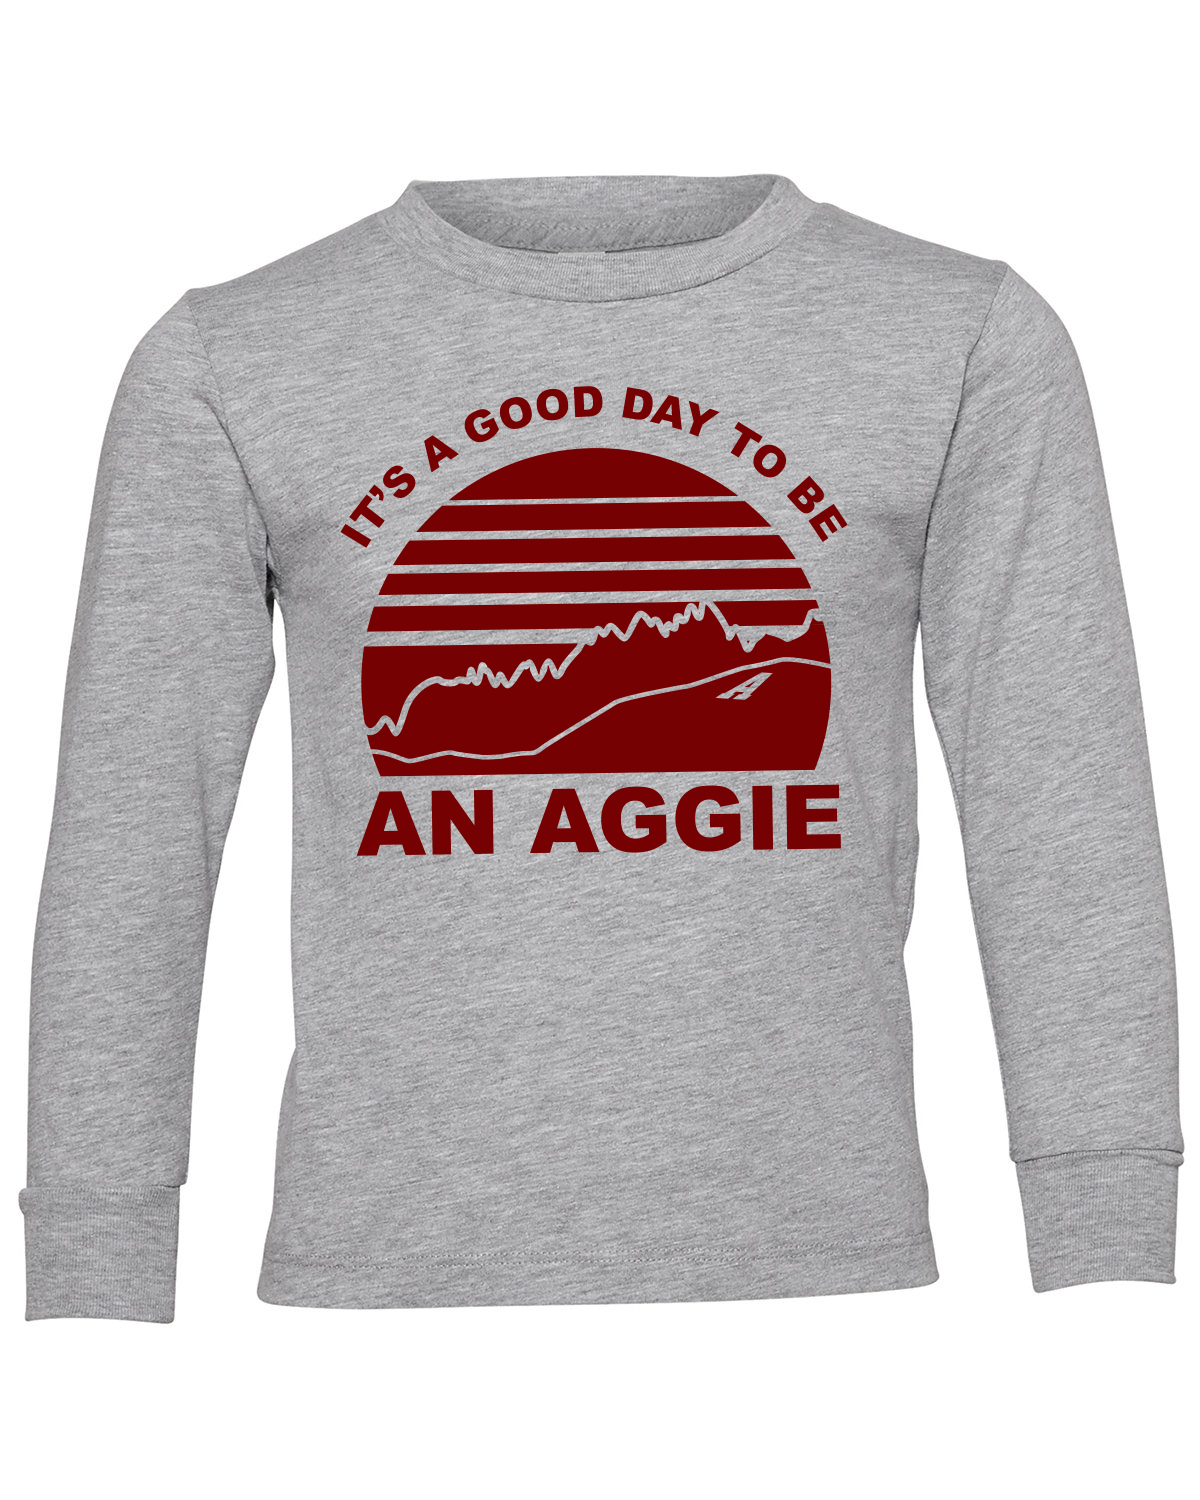 It's A Good Day To Be An Aggie Toddler Jersey Long Sleeve Tee